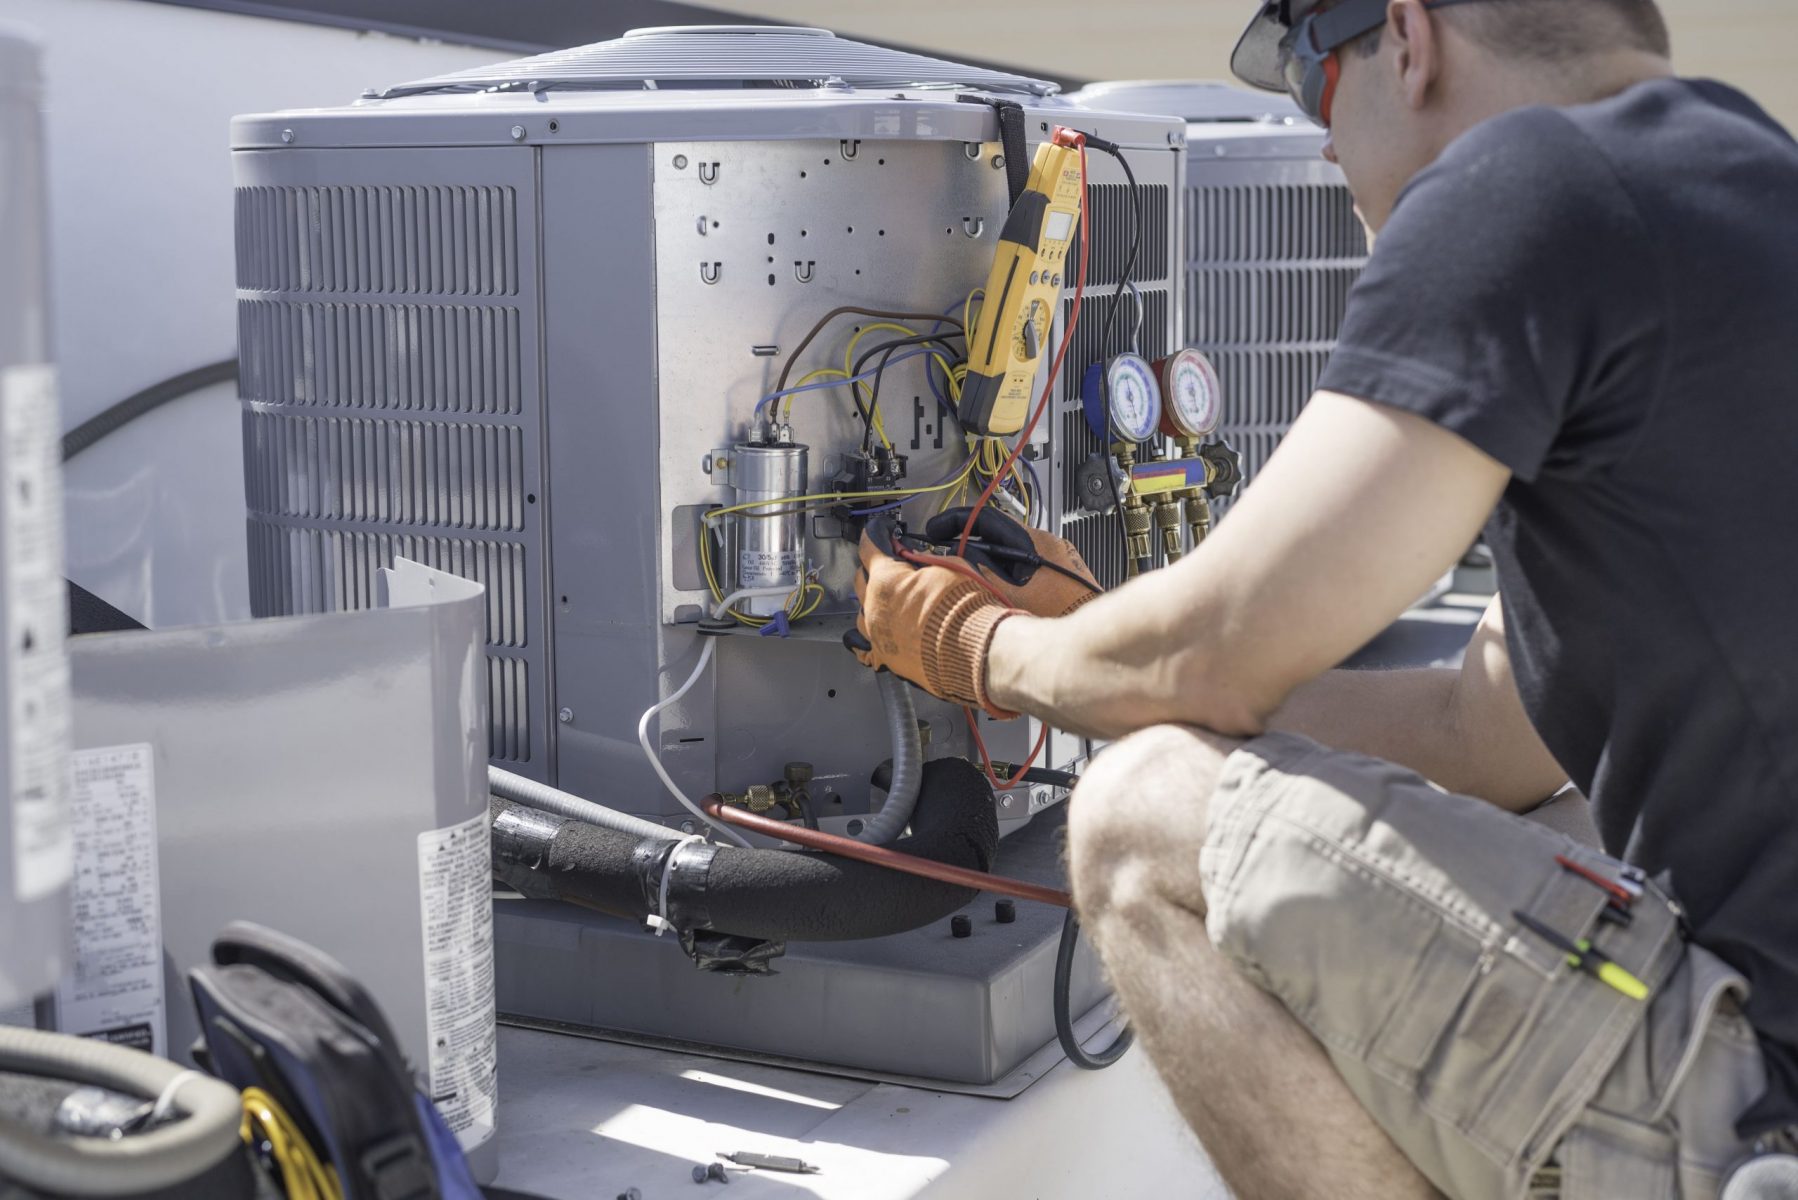 The effective furnace repair service